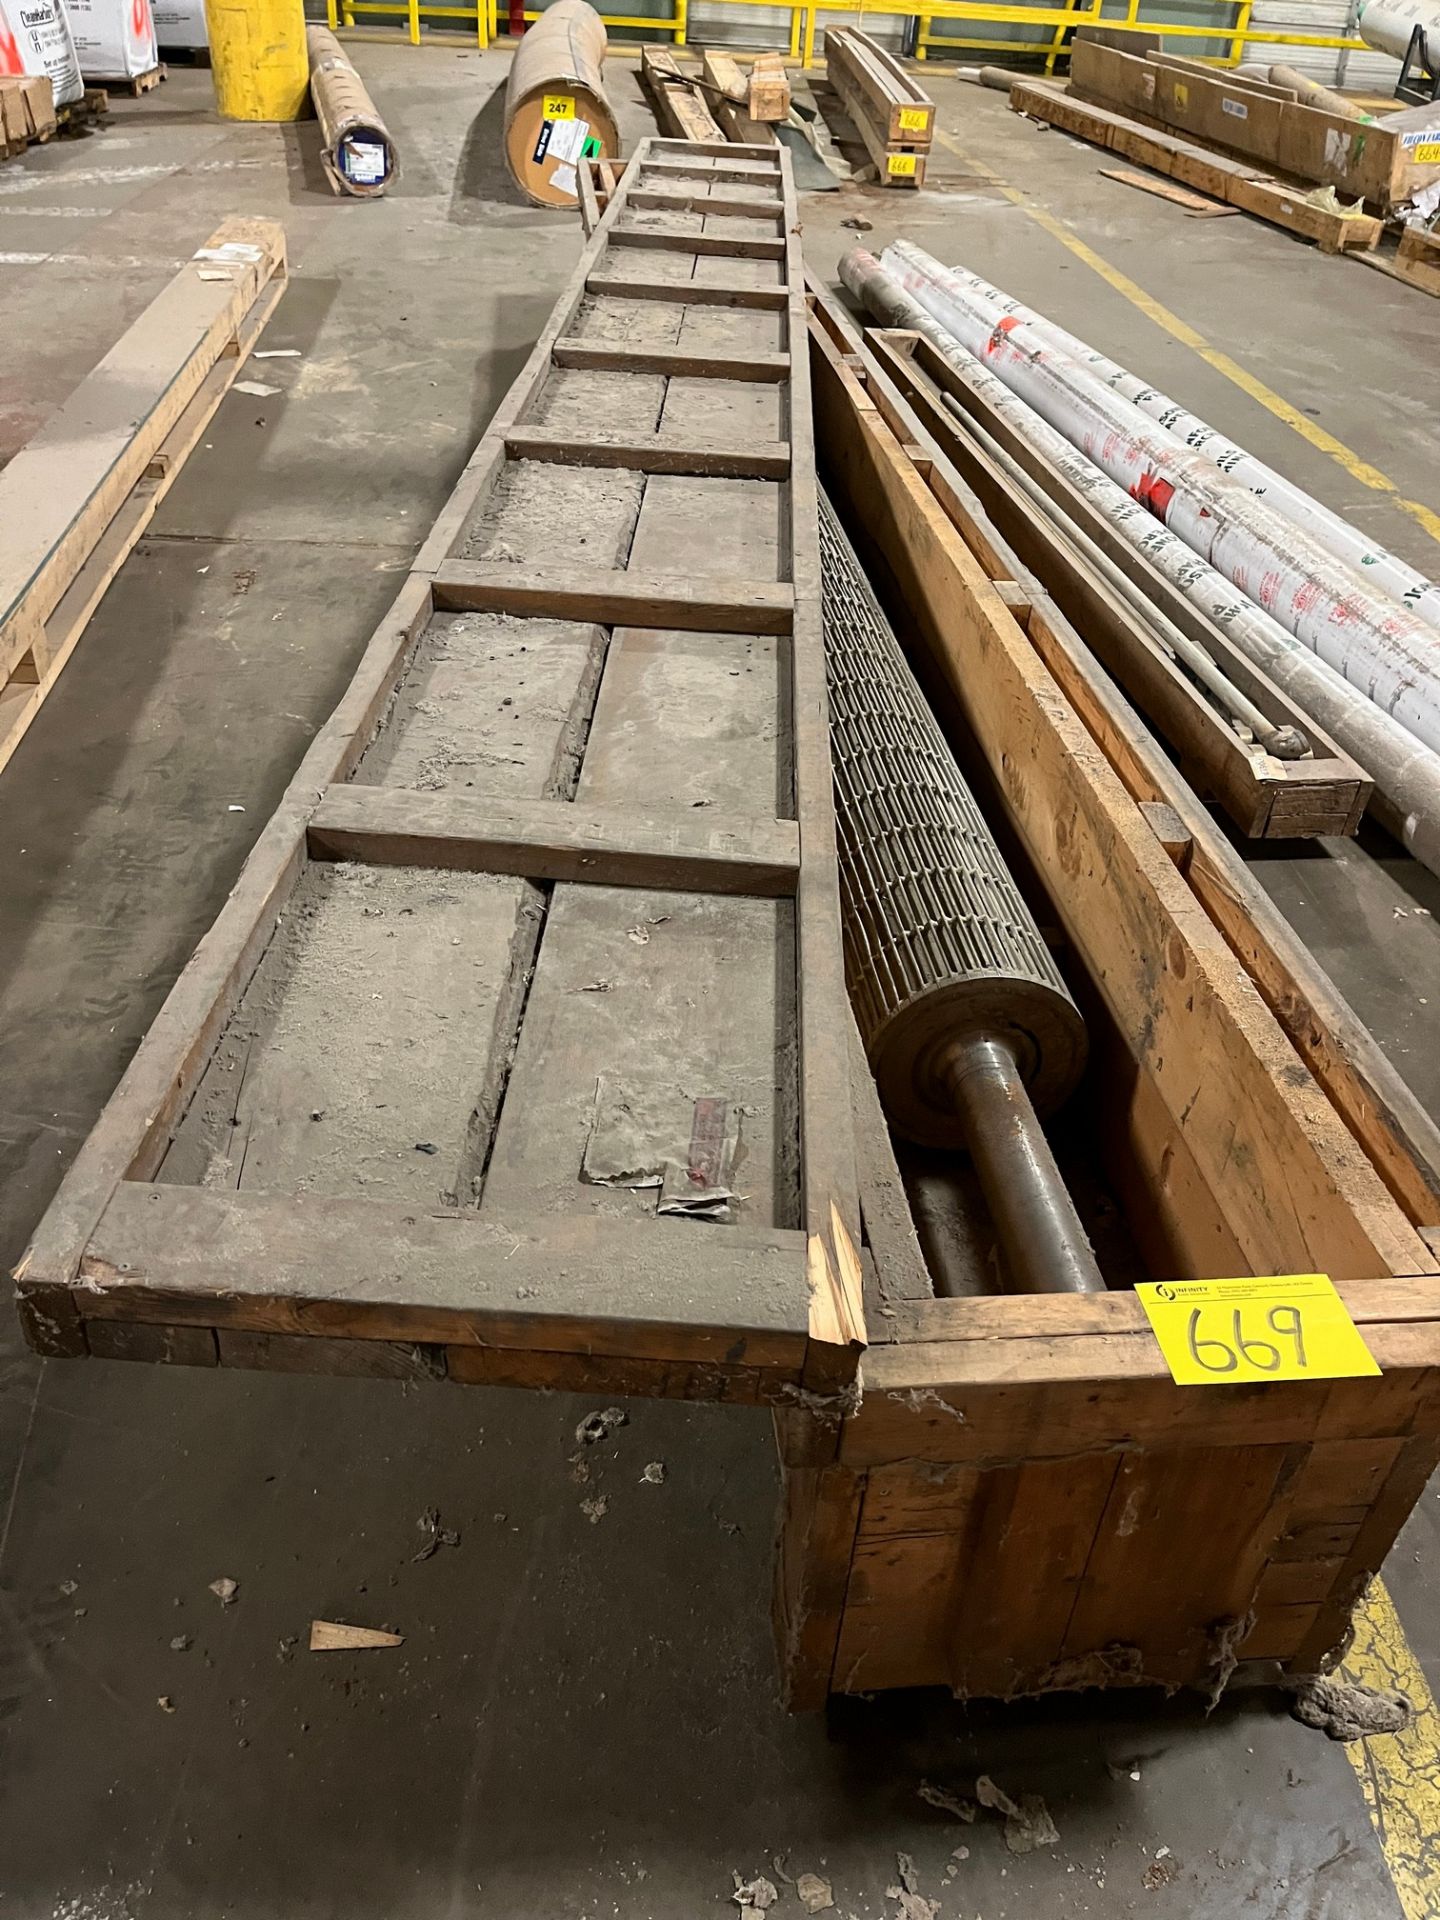 TURBINE FLOAT CELL ROLLER, APPROX. 9" DIA X 18'L (PM EAST WAREHOUSE)